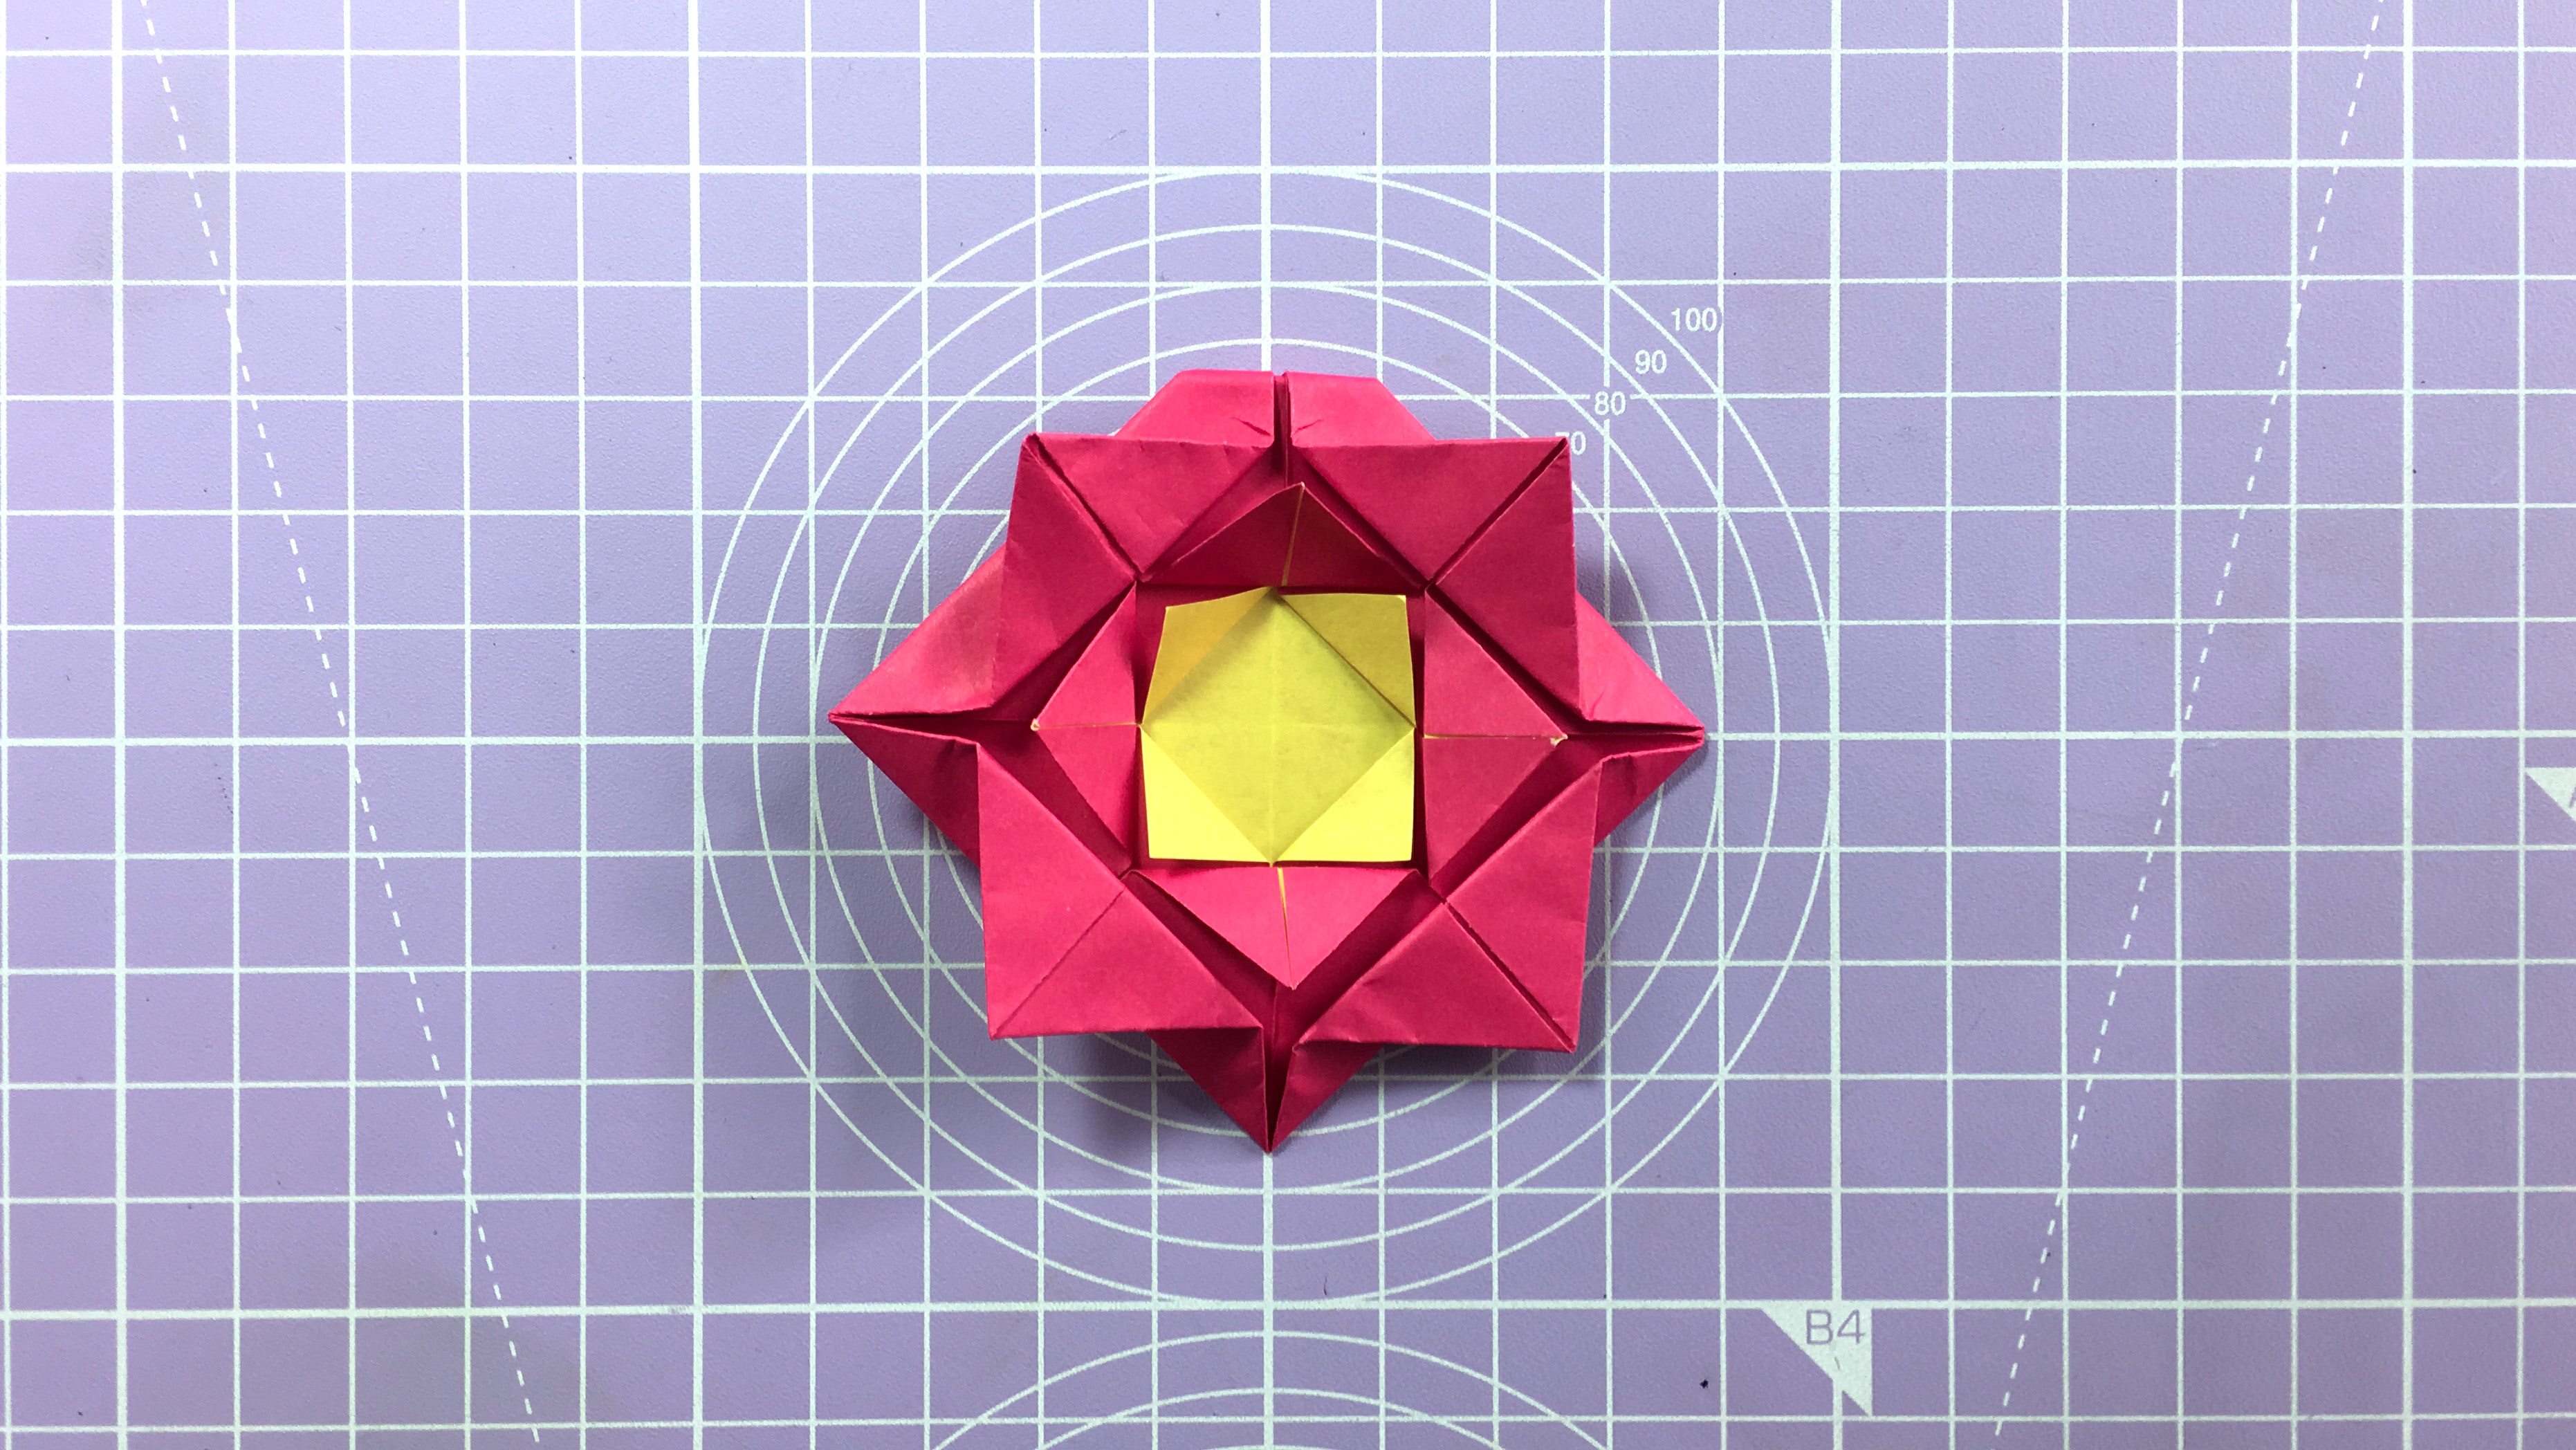 How to make an easy origami rose - step 11